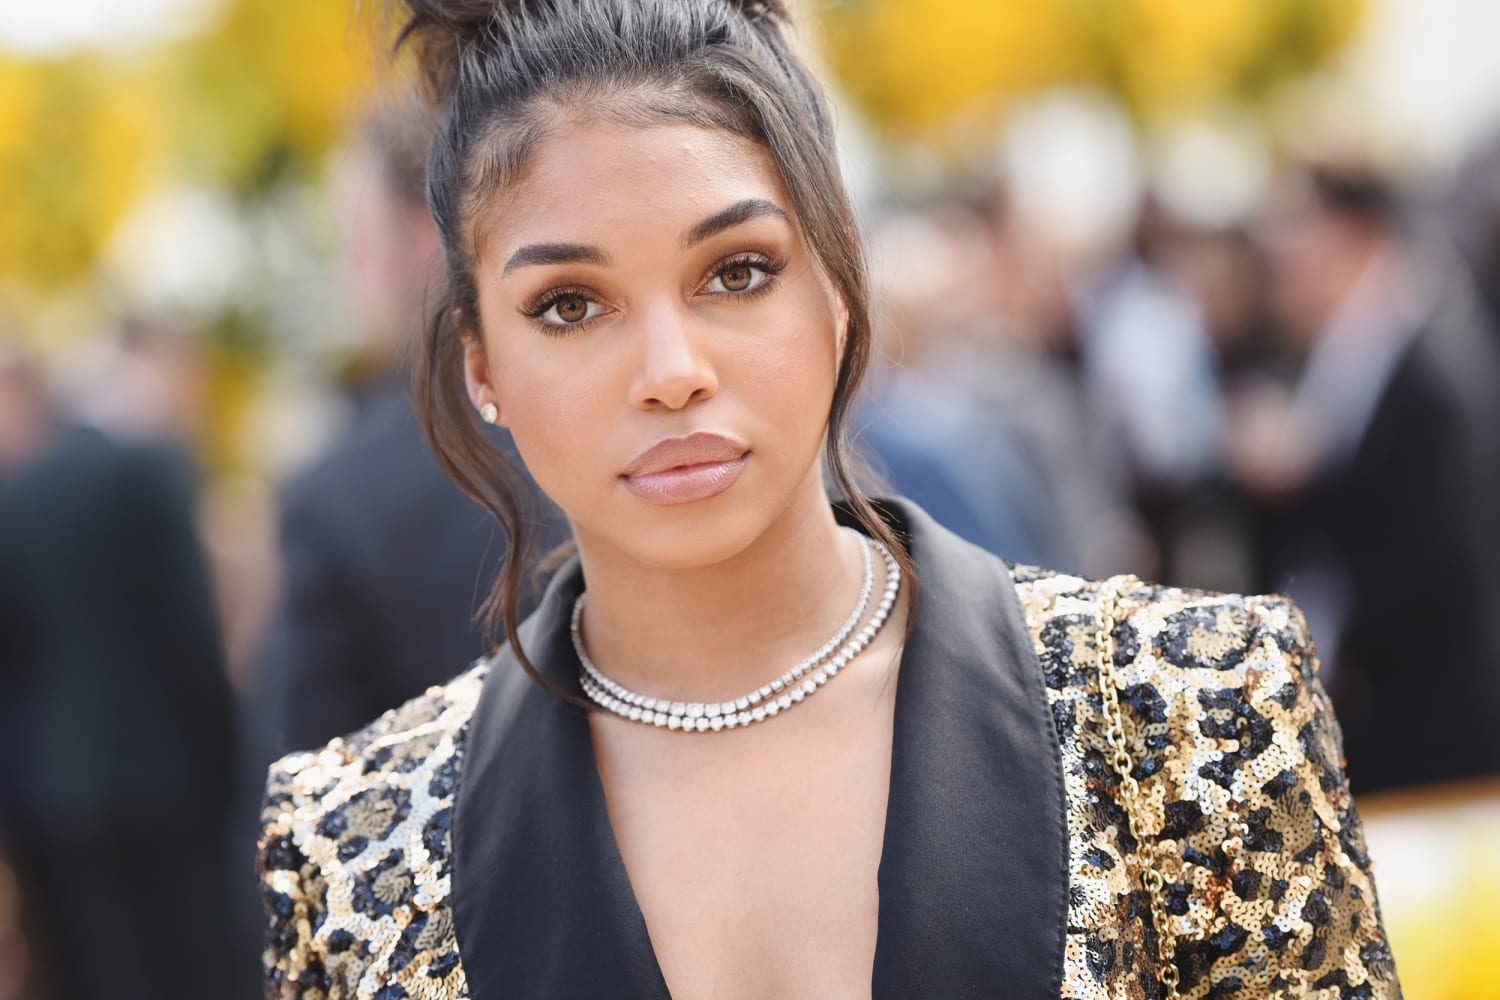 Lori Harvey Stepdaughter Of Steve Harvey Arrested After Hit And Run Accident